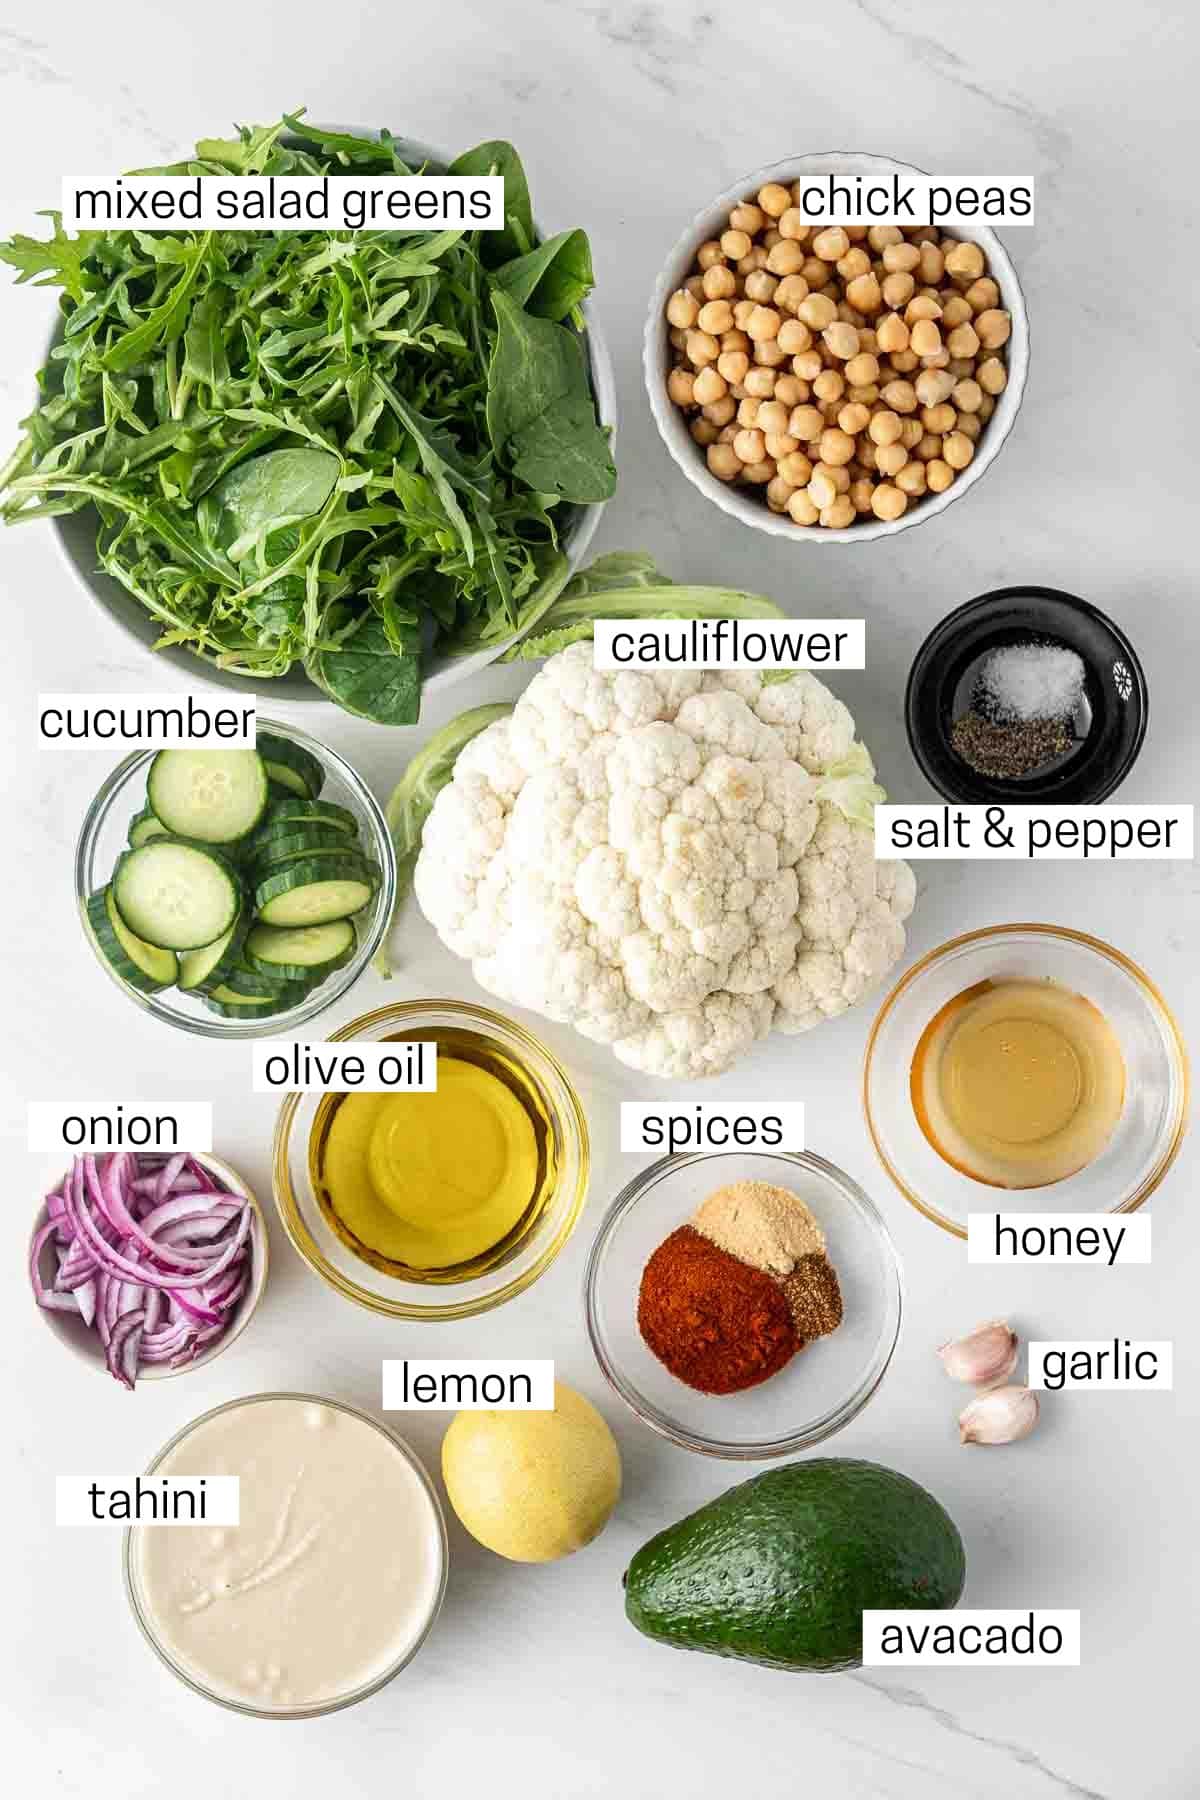 All ingredients needed to make cauliflower and chickpea salad with tahini dressing laid out in small bowls.